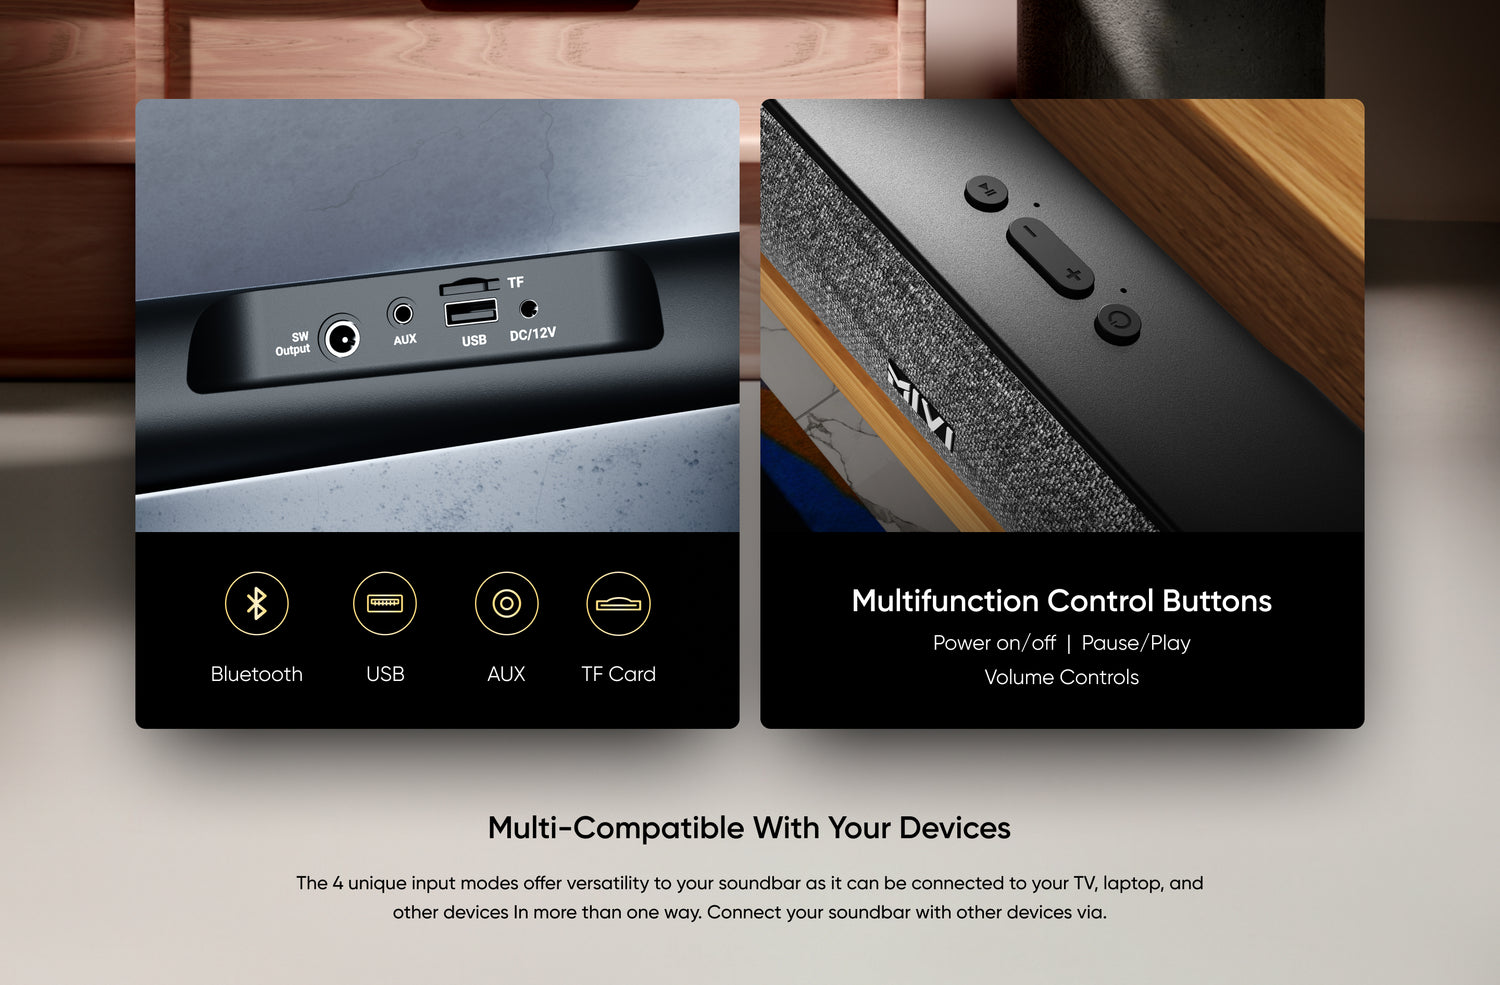 Bluetooth, USB, AUX, TF Card, 

Multifunction Control Buttons

Power on/off  |  Pause/Play
Volume Controls

Multi-Compatible with Your Devices

The 4 unique input modes offer versatility to your soundbar as it can be connected to your TV, laptop, and other devices In more than one way. Connect your soundbar with other devices via.